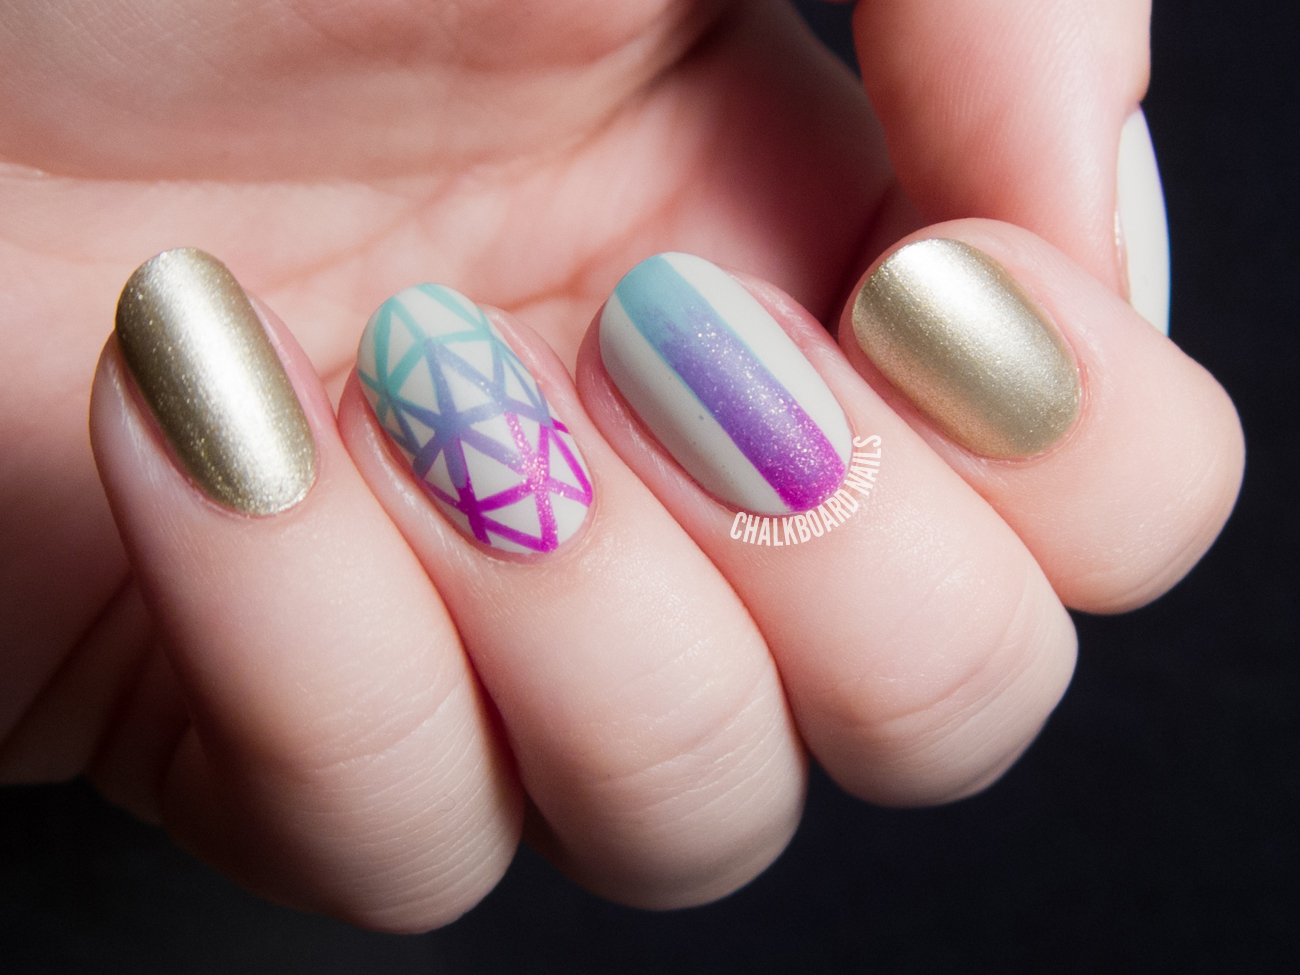 1. How to Create a Gradient Nail Art Design Step by Step - wide 4